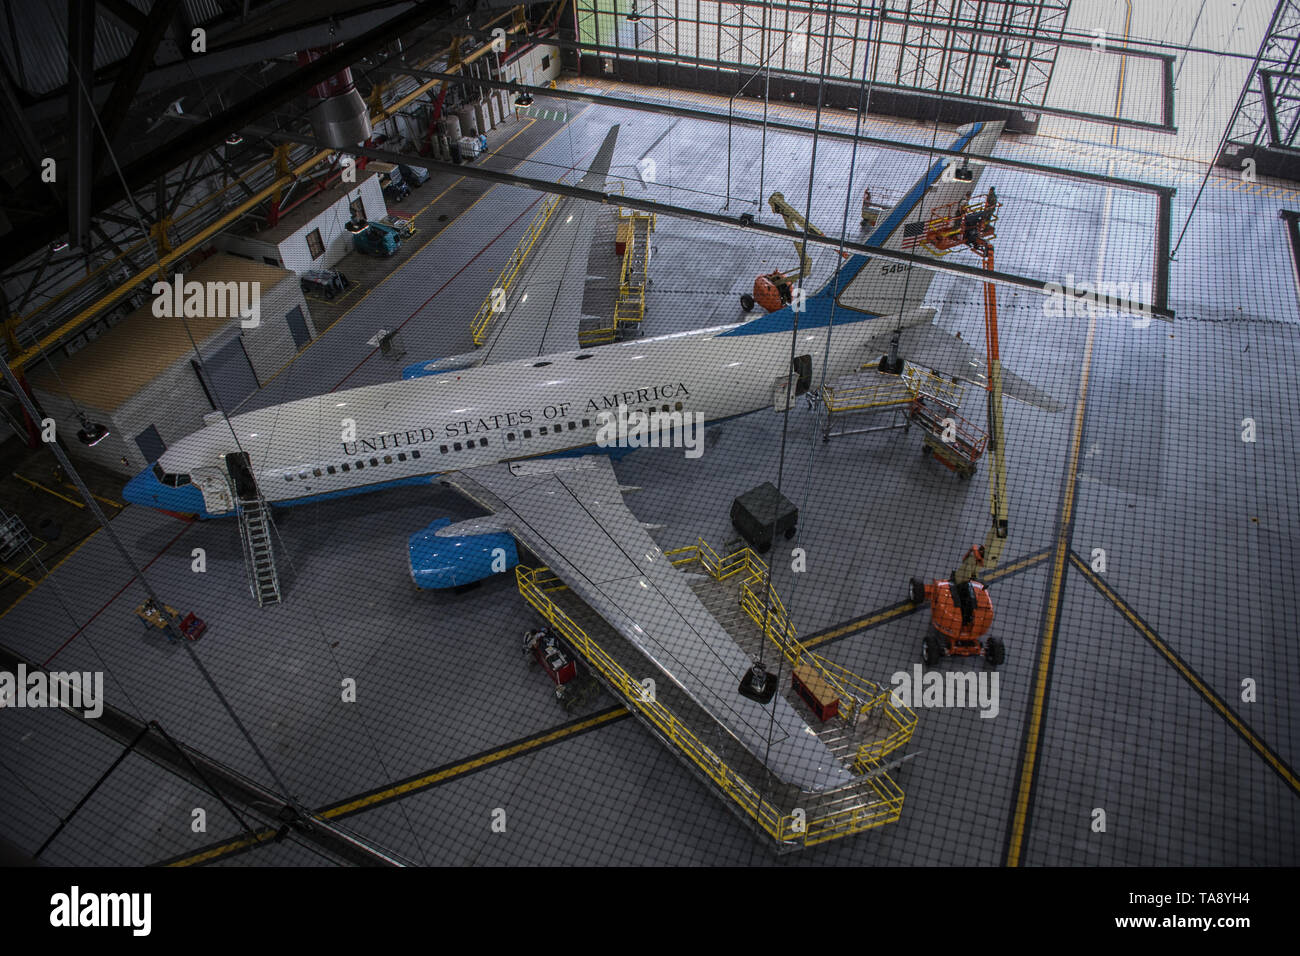 A 932nd Airlift Wing C-40C is surrounded by scaffolding and lifts as it has various routine maintenance done inside Hangar 1, Scott Air Force Base, Illinois, May 15, 2019. (U.S. Air Force photo by Christopher Parr) Stock Photo